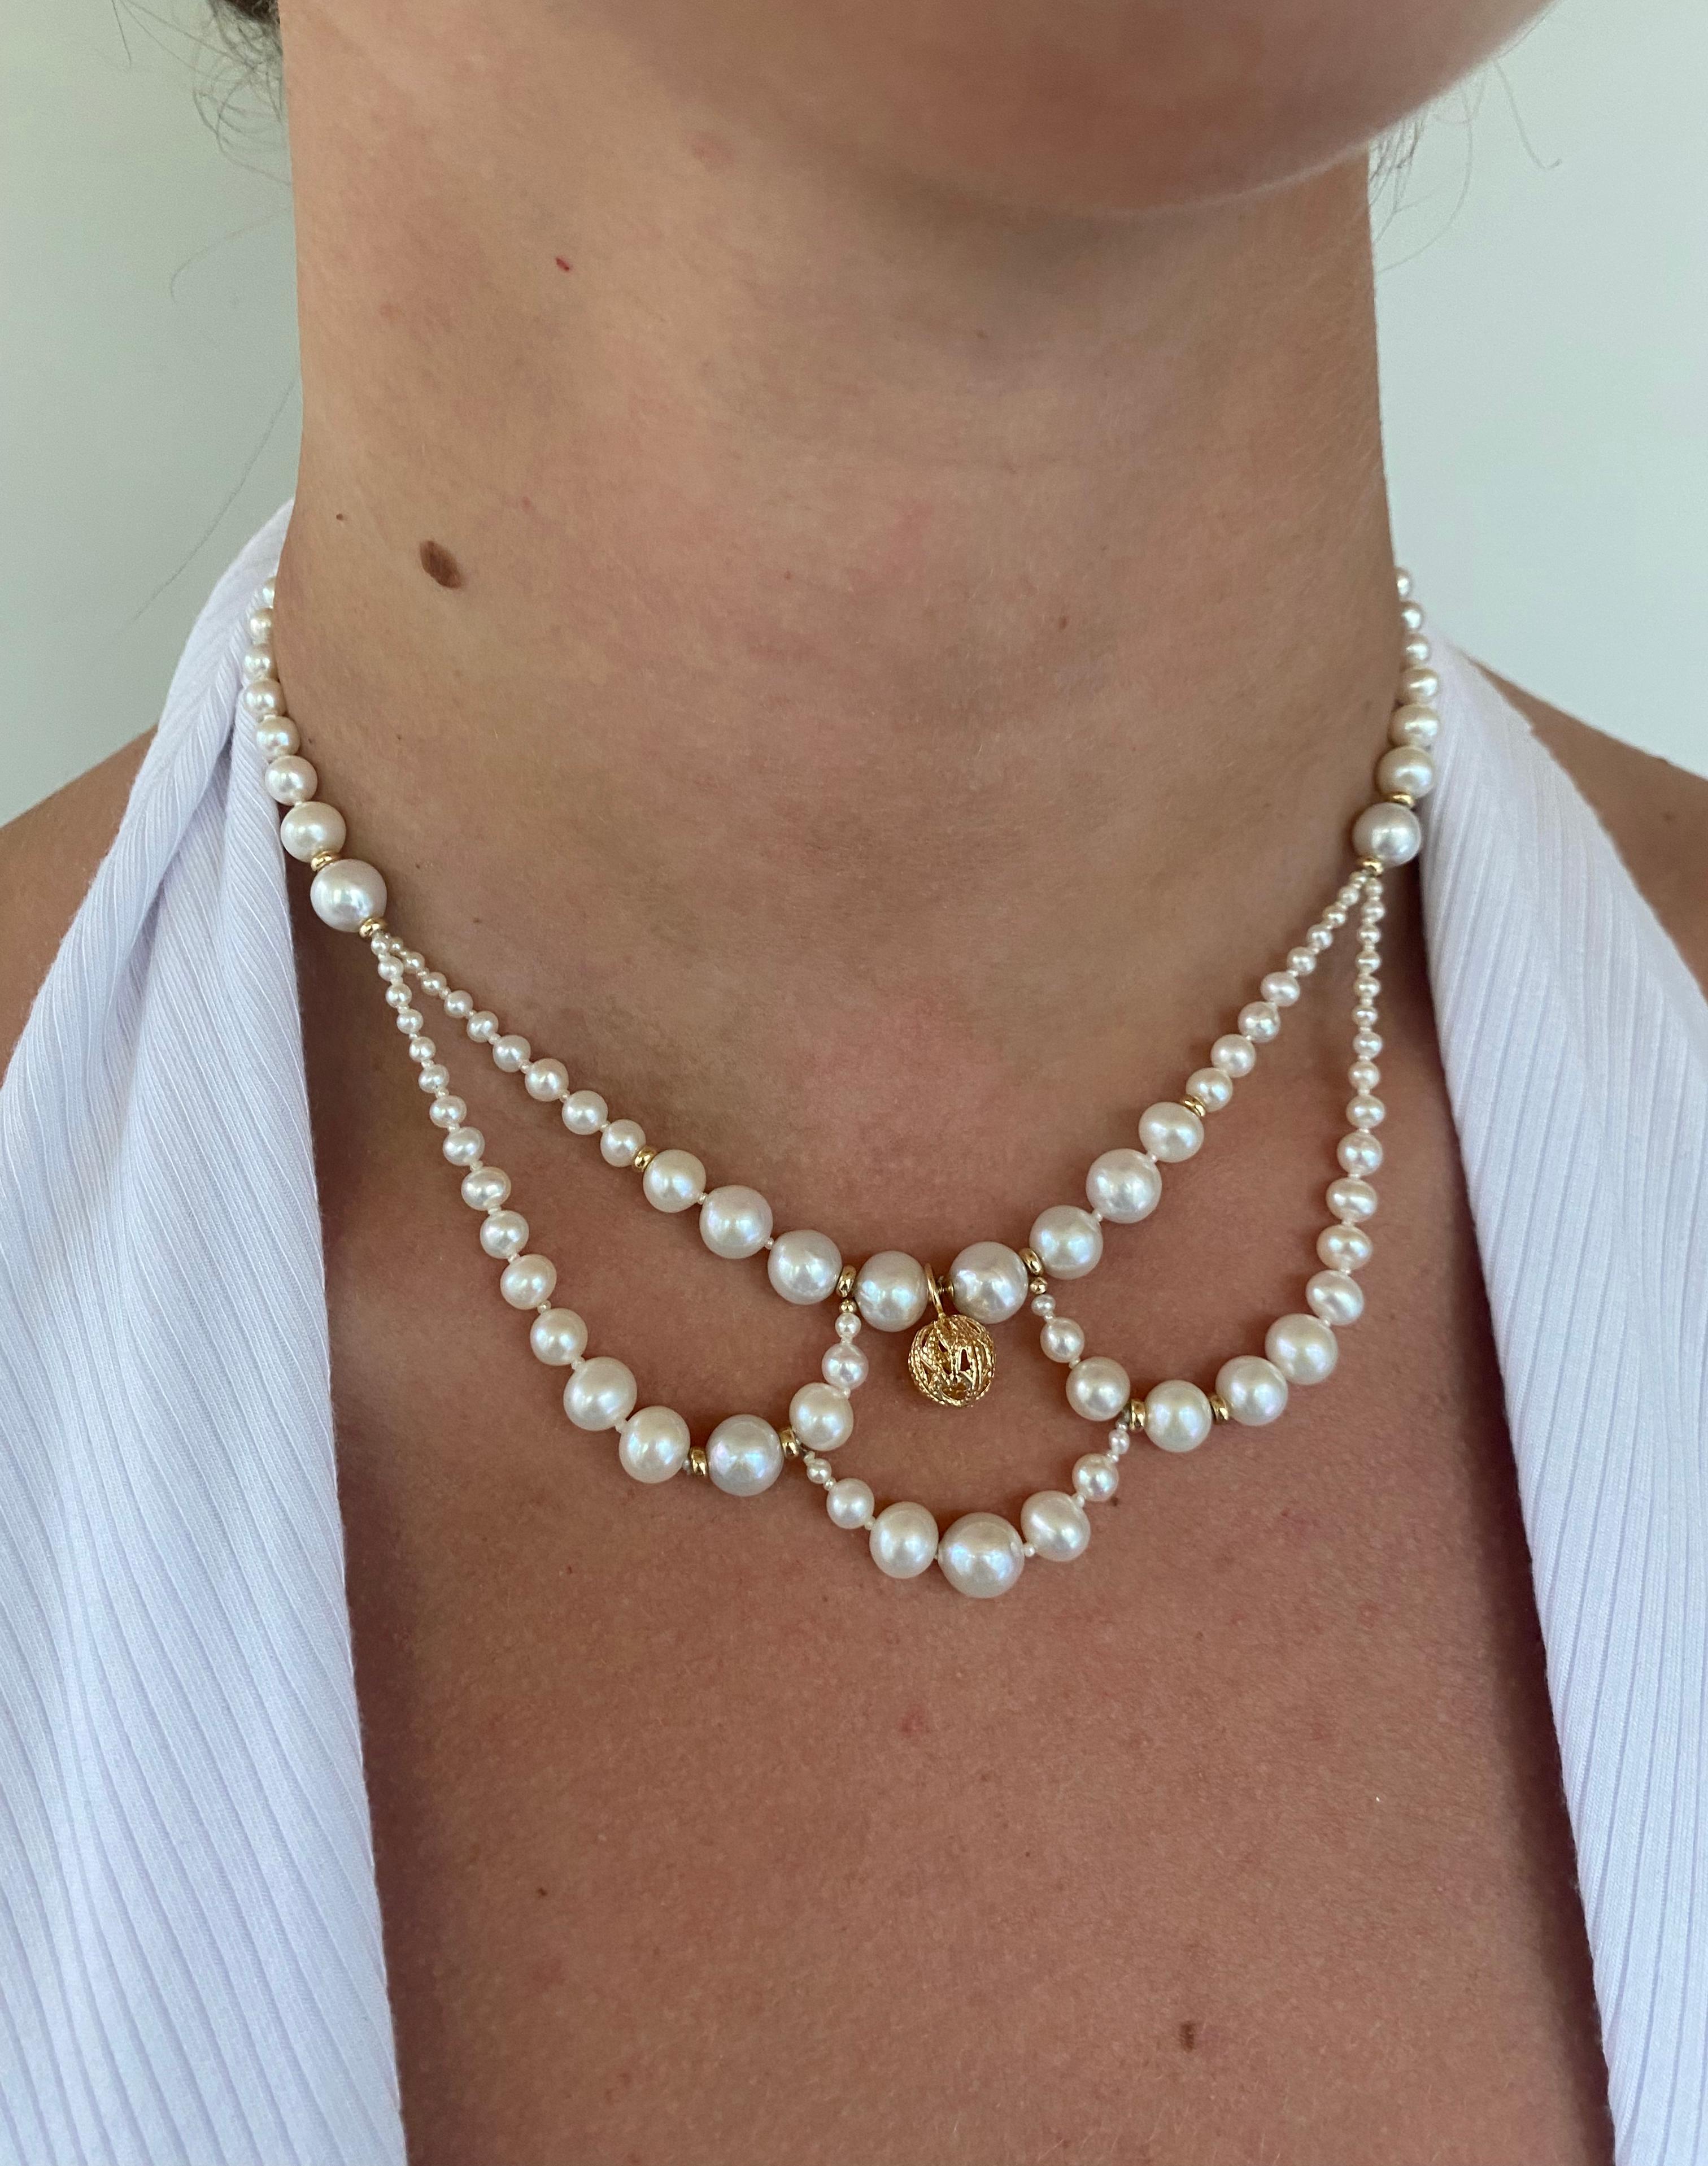 Marina J. Draped Victorian Inspired Pearl & Solid 14k Yellow Gold Necklace For Sale 2